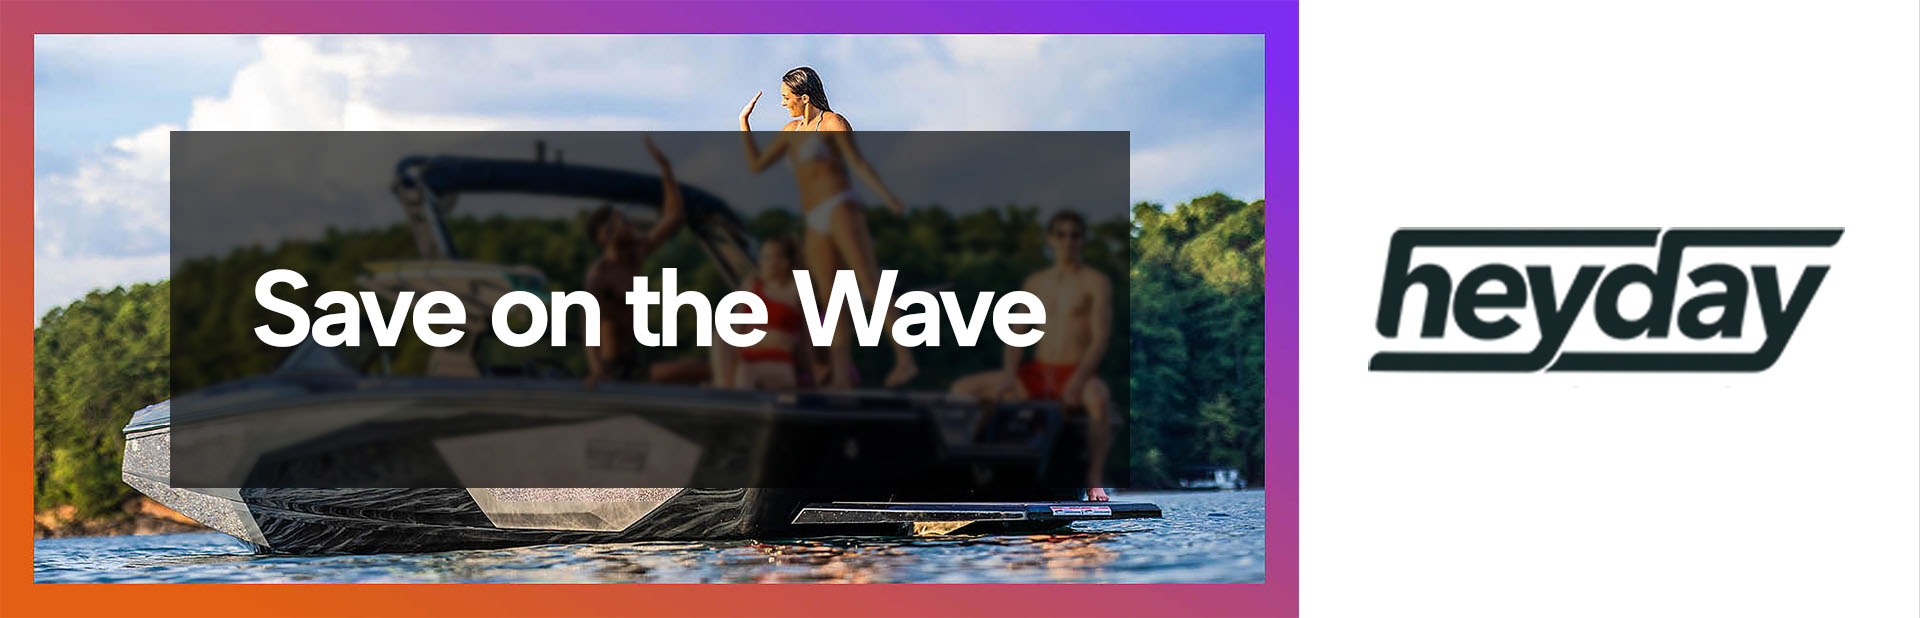 Save on the Wave